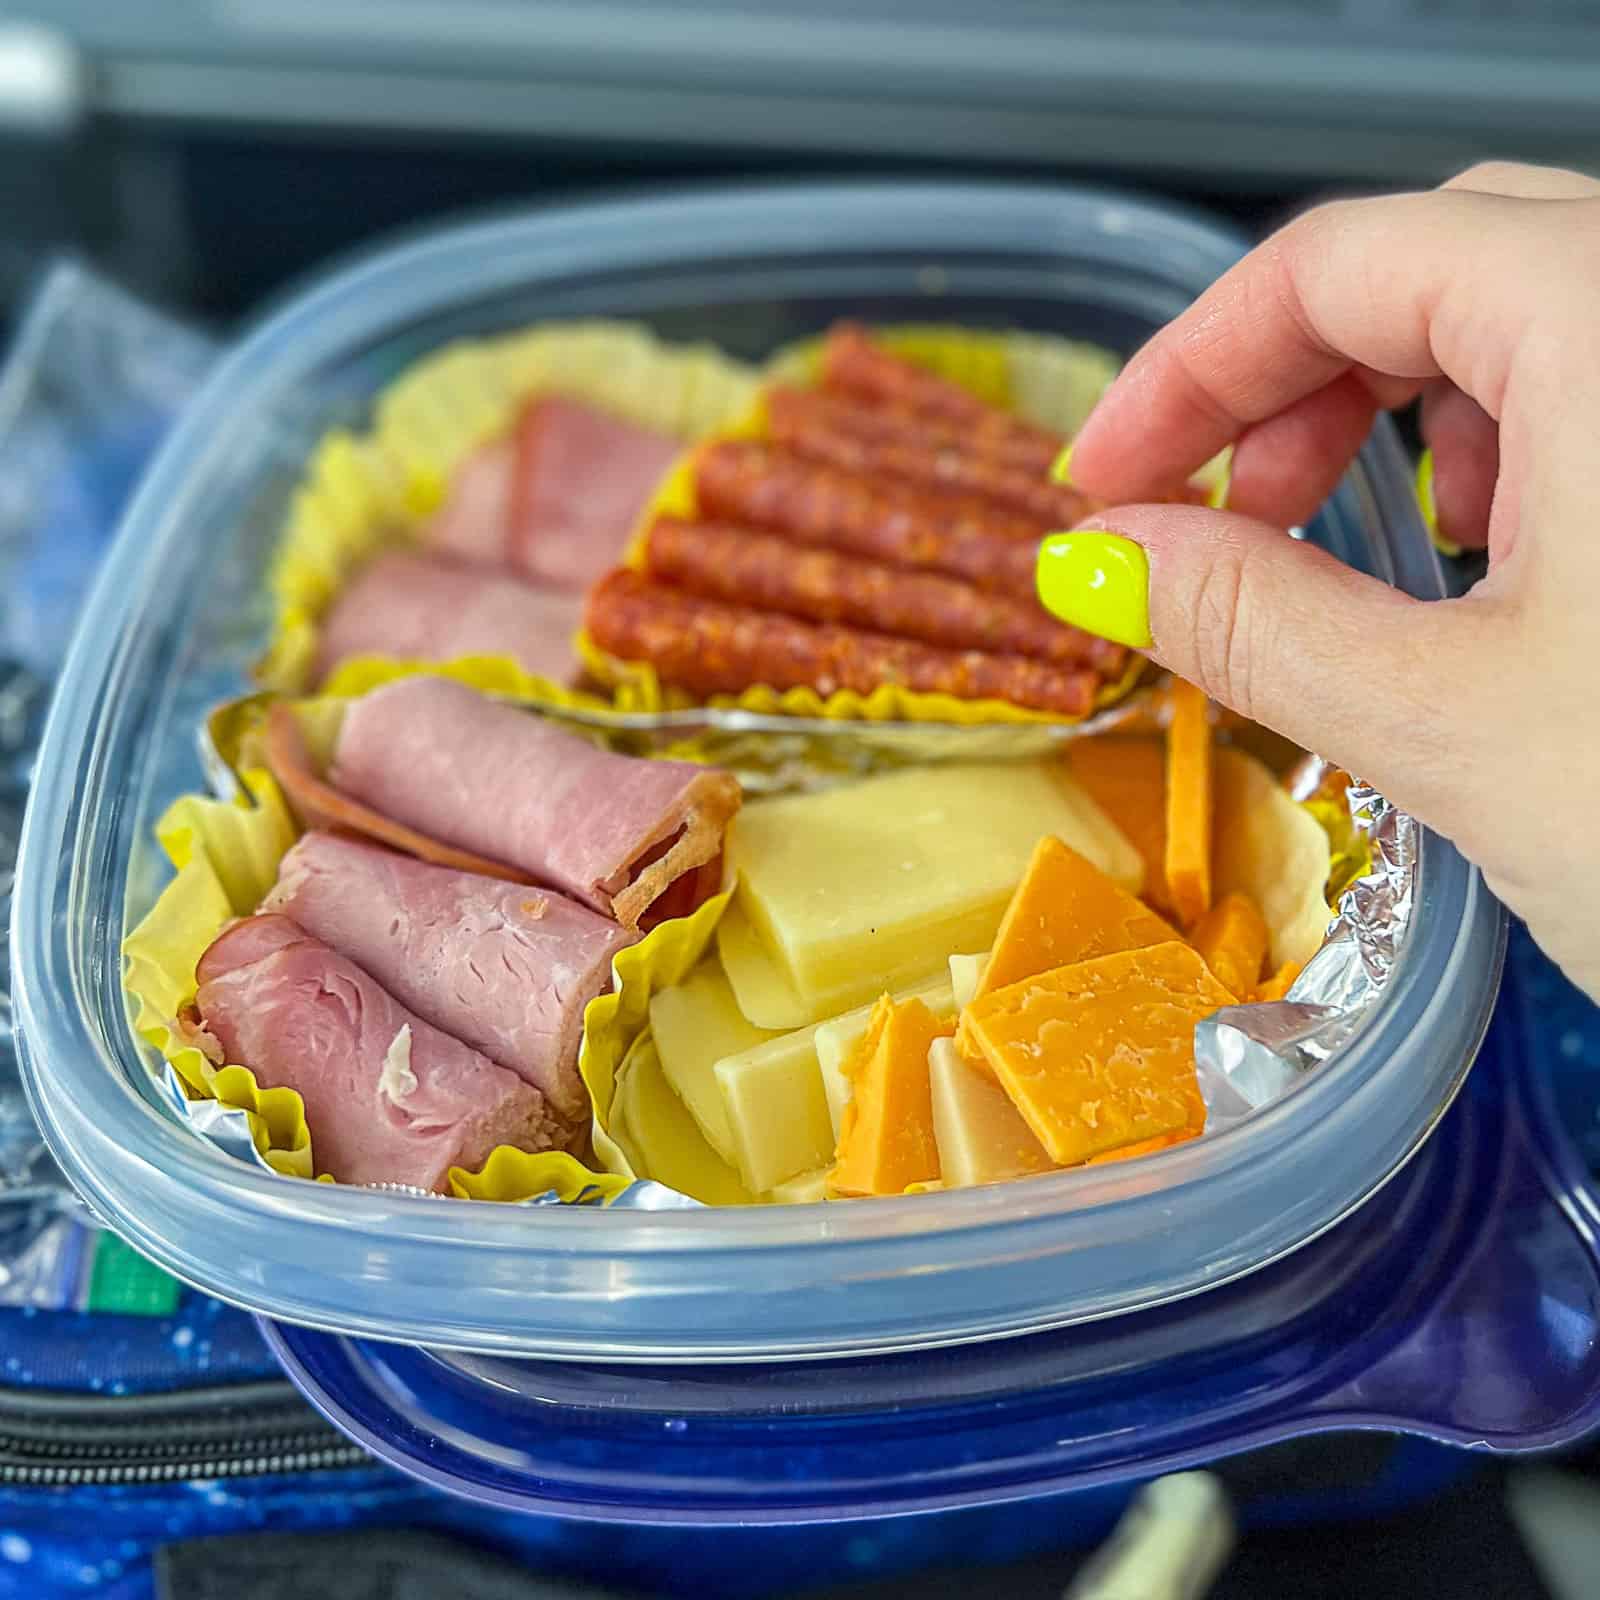 Flying on a plane with homemade snacks